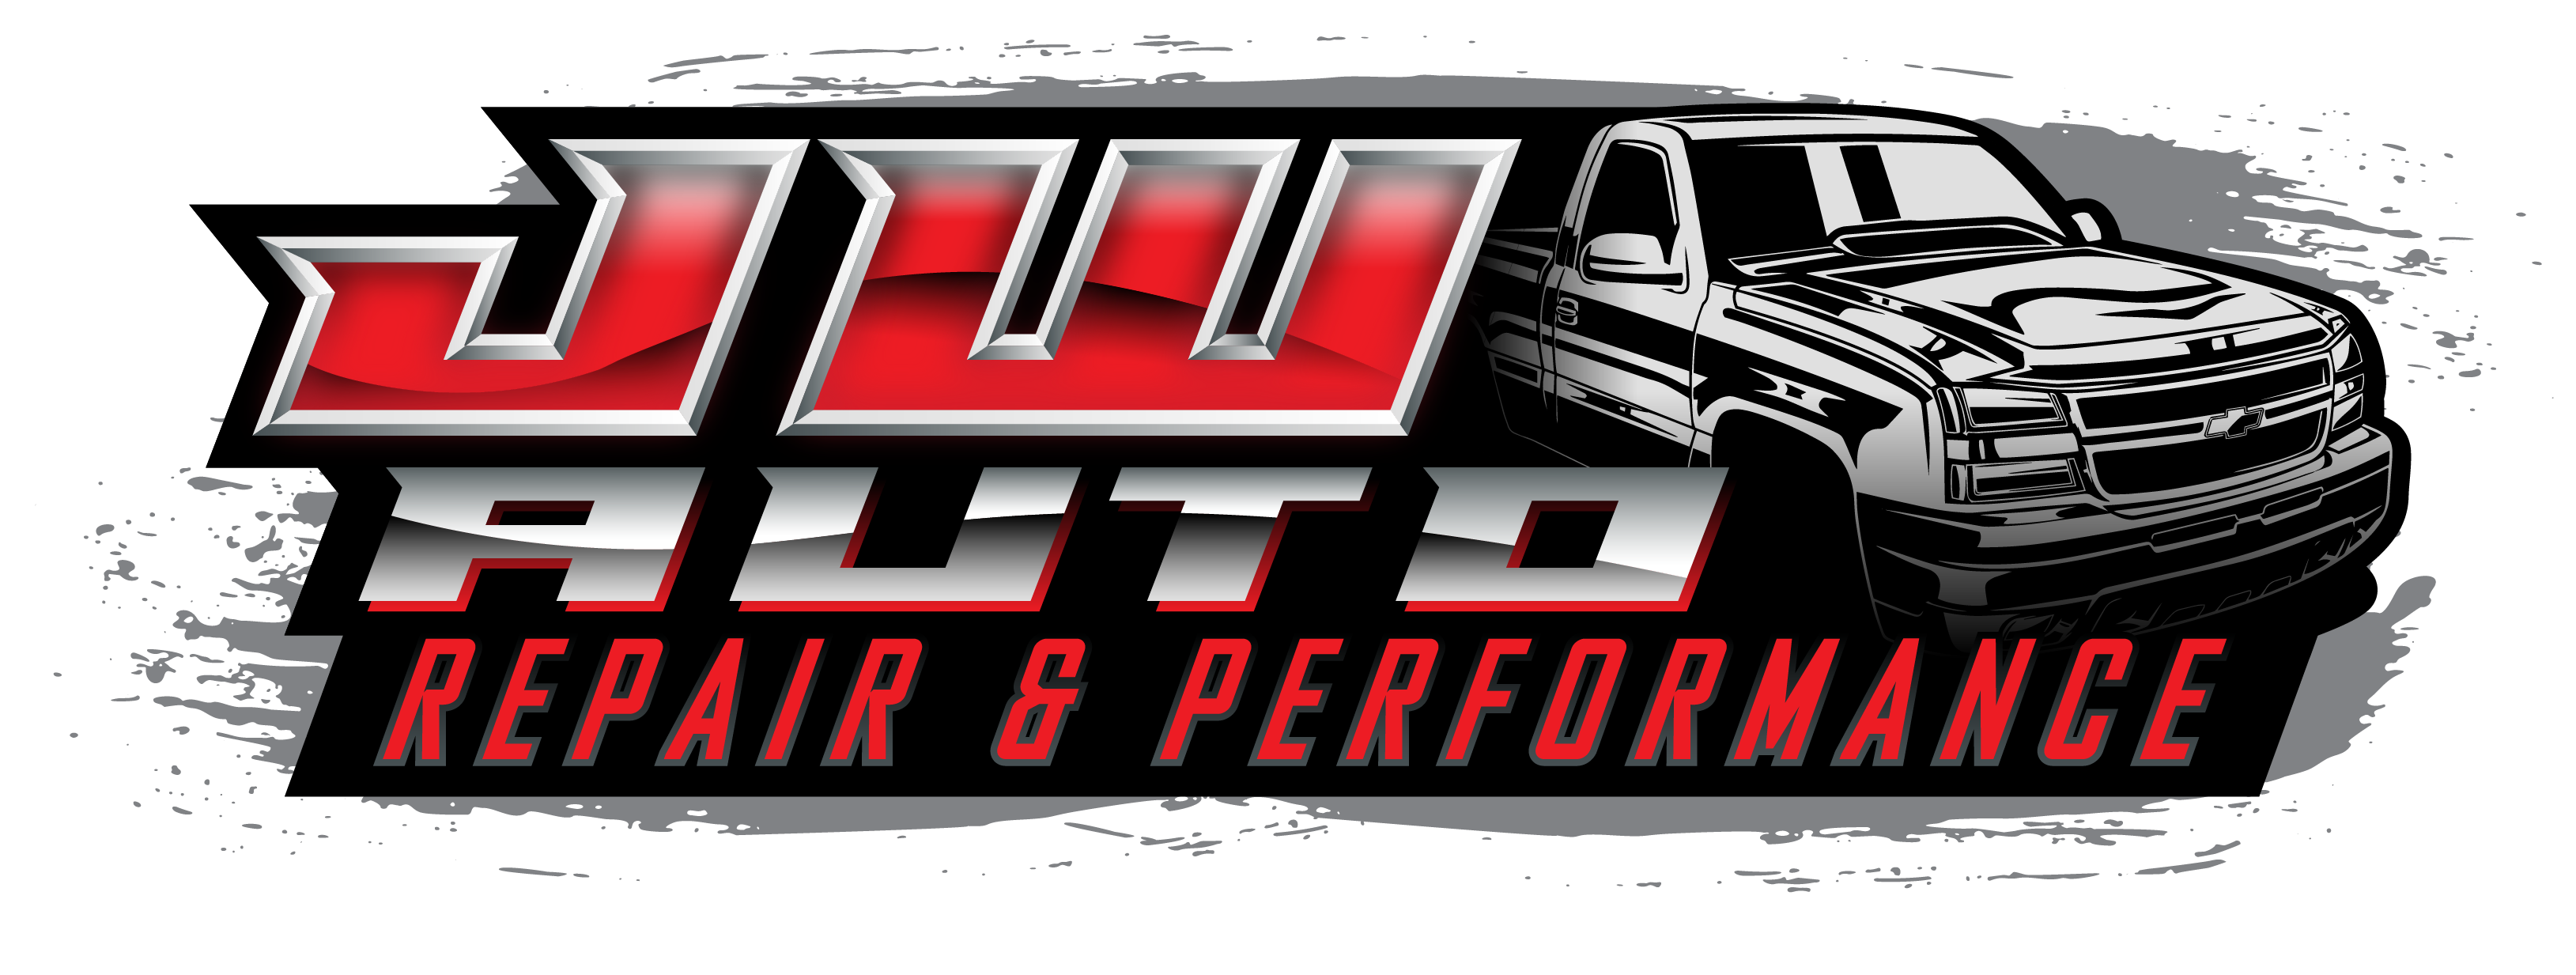 A logo for J.W. Auto Repair and Performance shows the text "JW Auto" to the left and a illustration of a Chevy truck to the right. Below the text "JW Auto" it says "Repair and Performance".